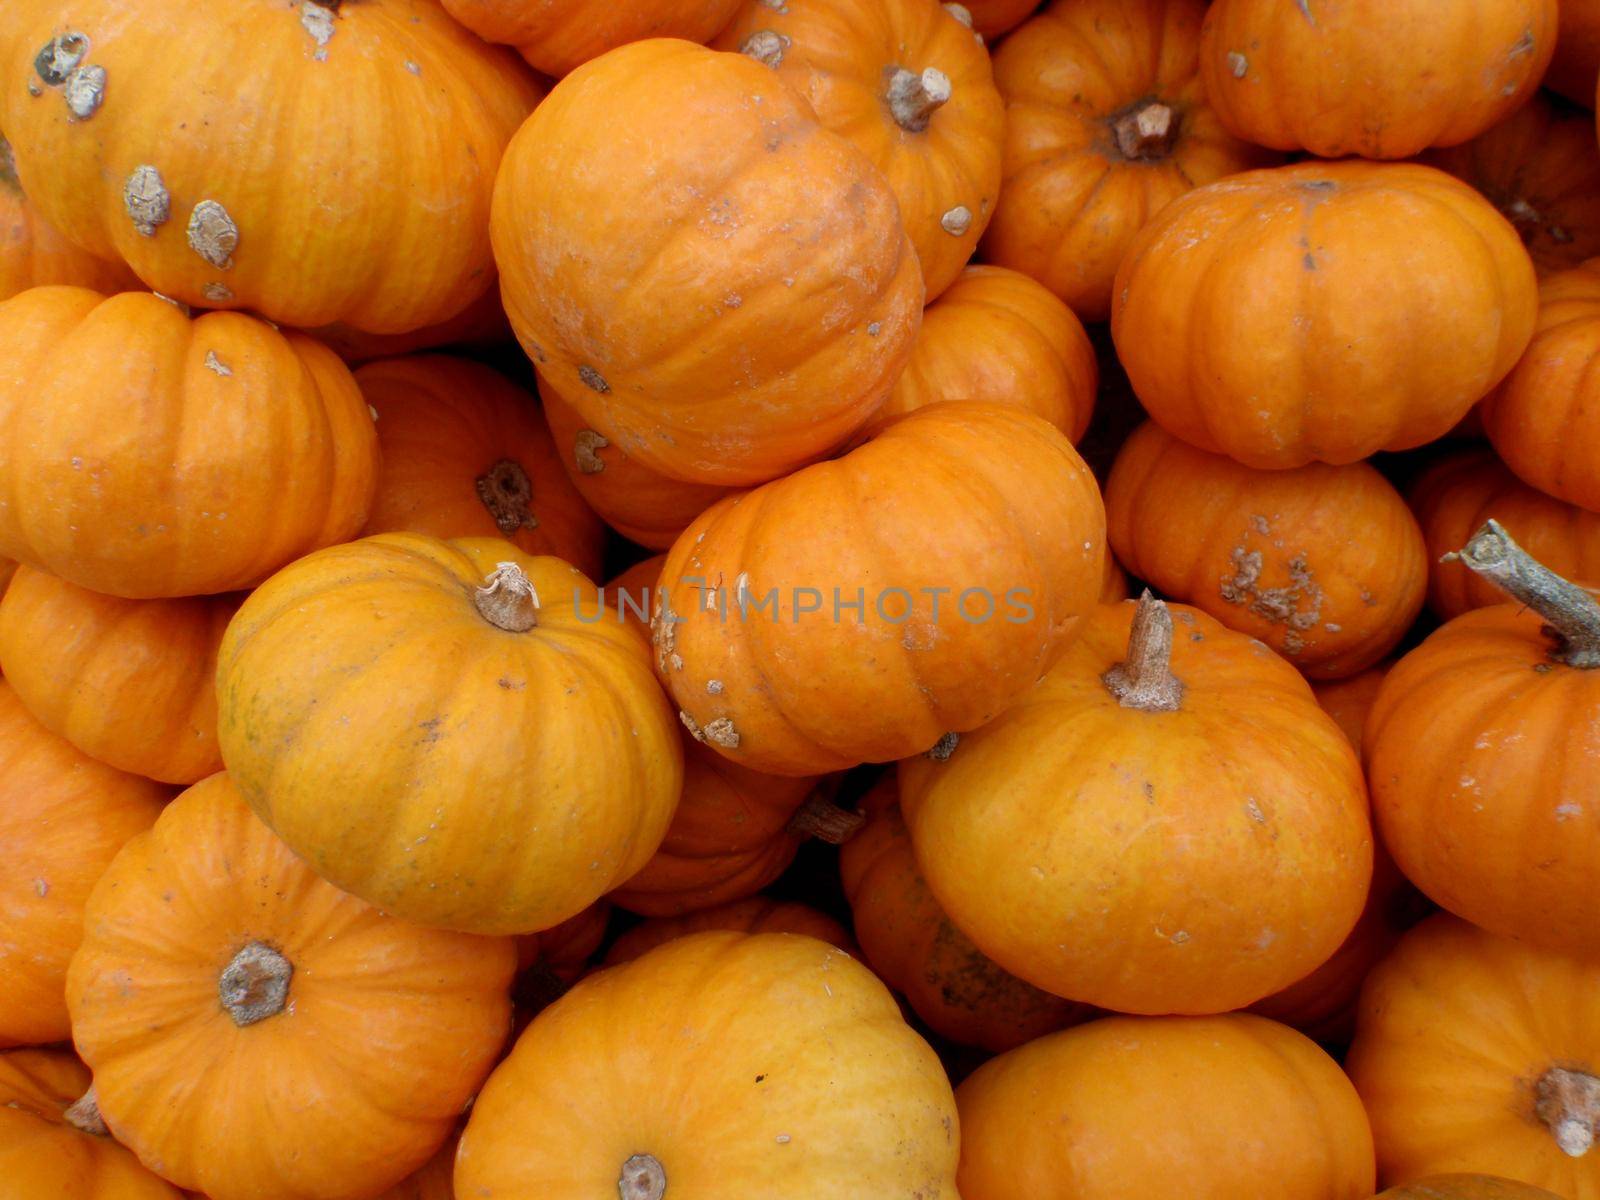 Close up of small organic pumpkins at a farmers market by EricGBVD